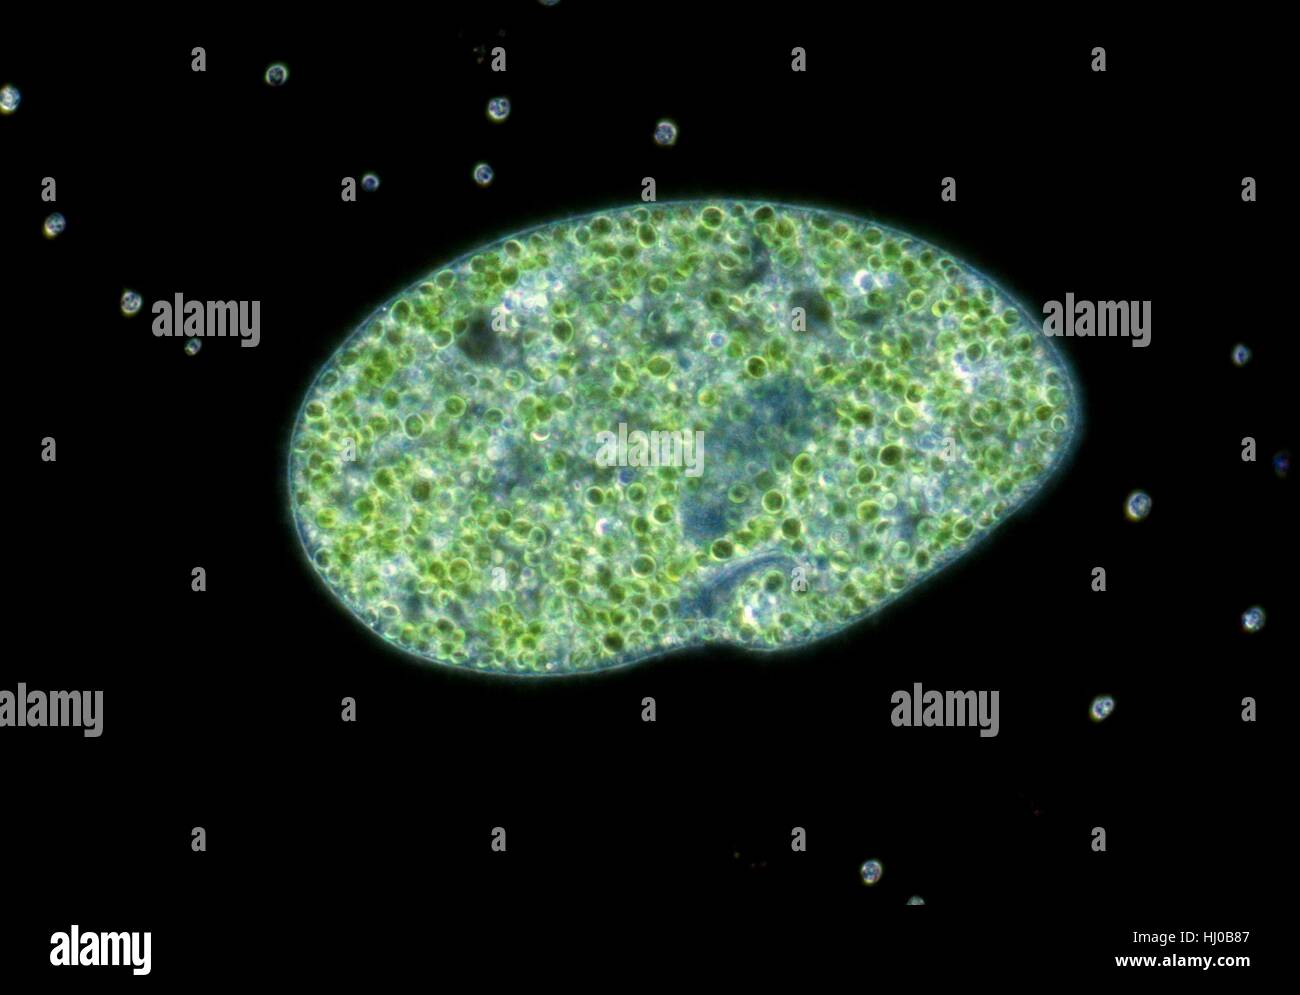 Darkfield light micrograph of Paramecium bursaria,a ciliate protozoan,that contains endosymbiotic green algae (Chlorella sp.).Paramecium are found mainly in stagnant ponds,feeding on bacteria plant particles.They have permanent mouth called oral grove.Food taken in through oral groove is digested Stock Photo